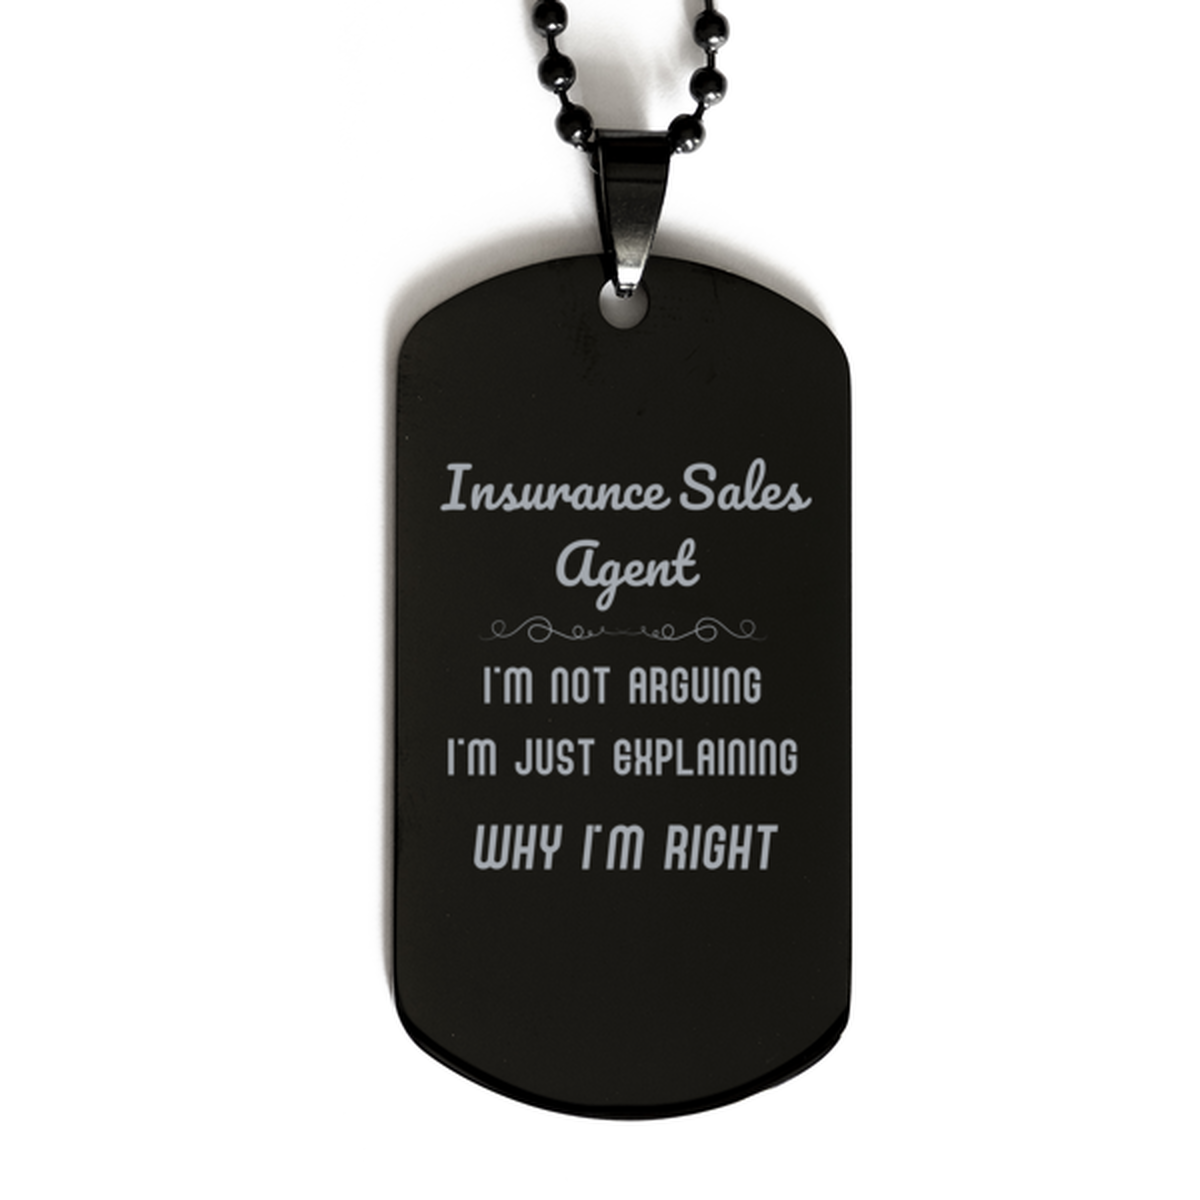 Insurance Sales Agent I'm not Arguing. I'm Just Explaining Why I'm RIGHT Black Dog Tag, Funny Saying Quote Insurance Sales Agent Gifts For Insurance Sales Agent Graduation Birthday Christmas Gifts for Men Women Coworker